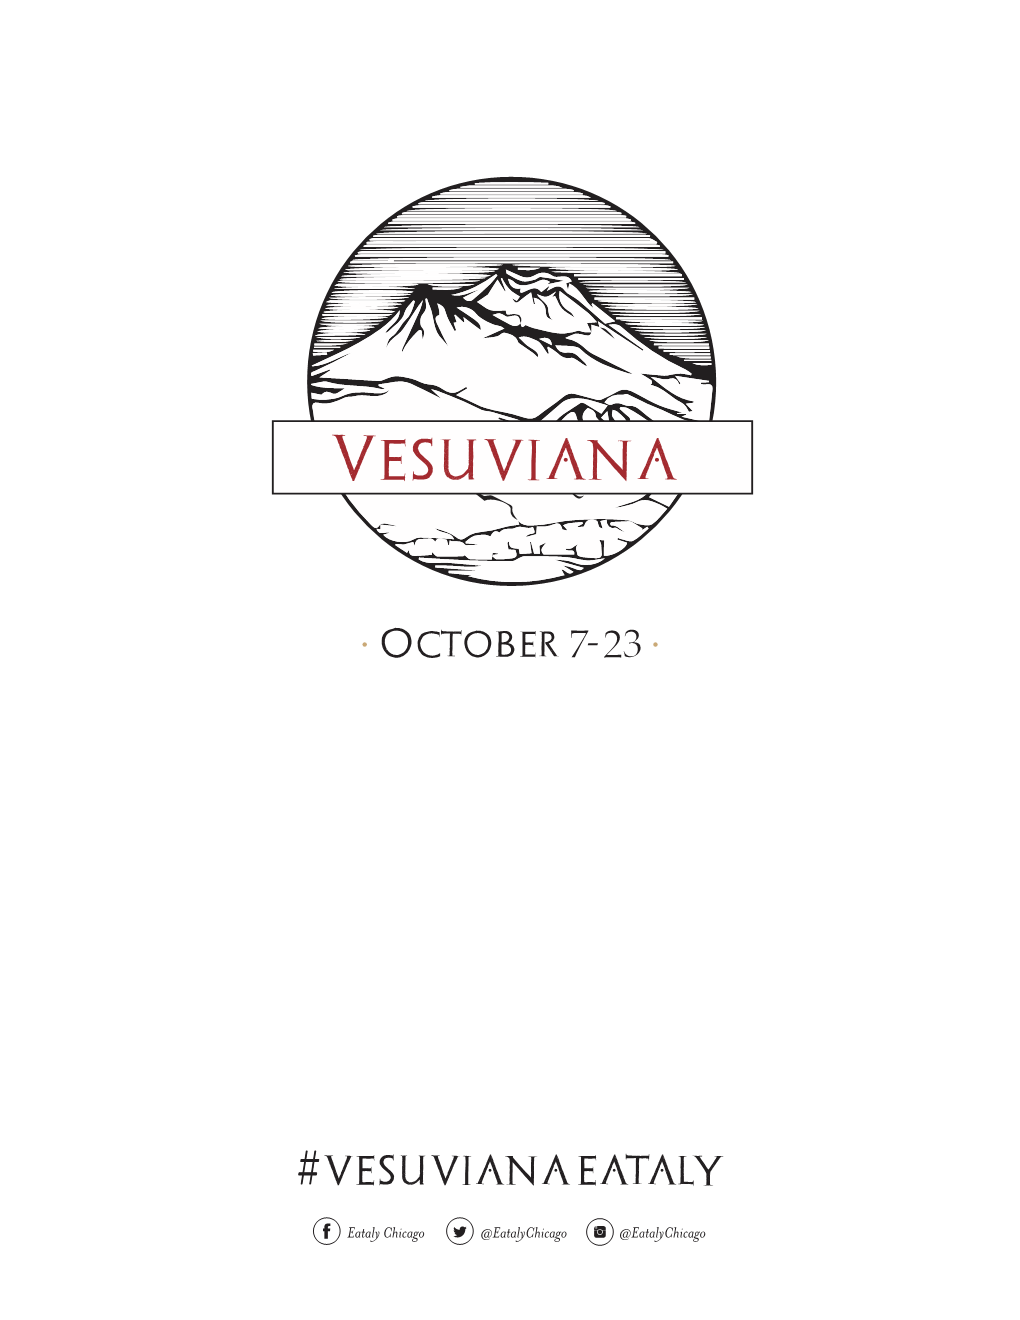 Vesuviana Features an Extensive List Caramelized Onion Ragù · 24 of Volcanic Wines and Traditional Gnocchi Alla Sorrentina Southern Italian Fare